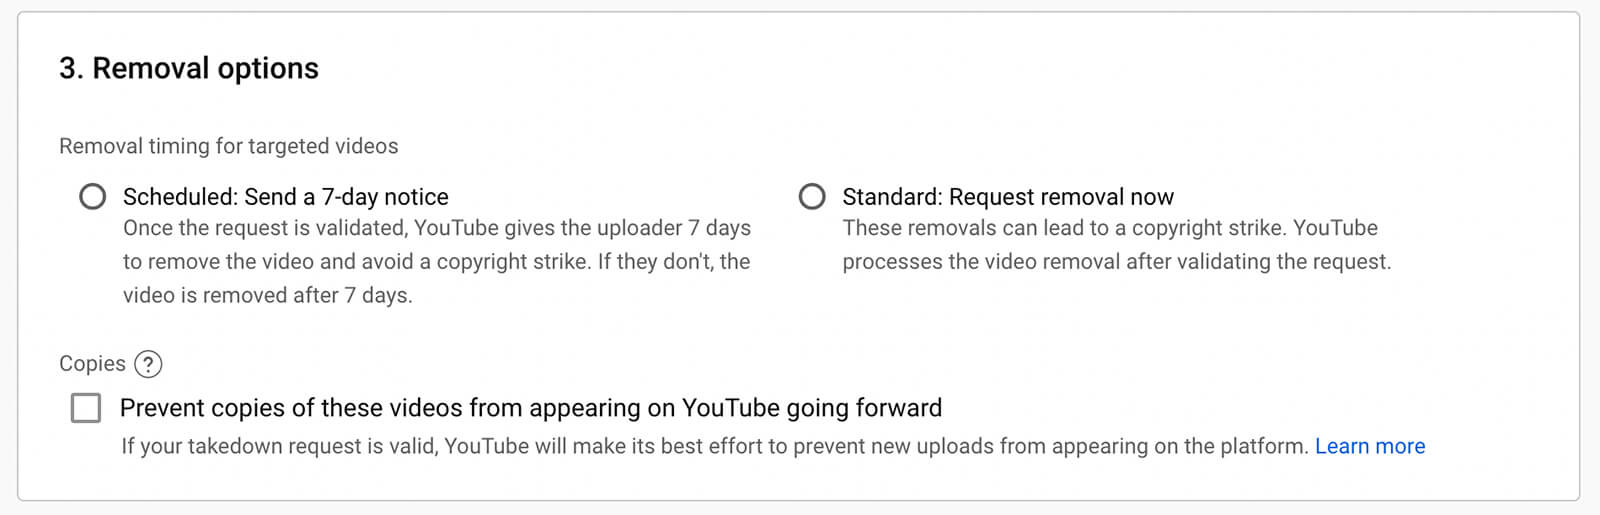 how-to-manage-intellectual-property-on-youtube-removal-options-send-notice-request-removal-creates-copyright-strike-prevent-additional-copies-from-appearing-copyright-match-tool-example-24